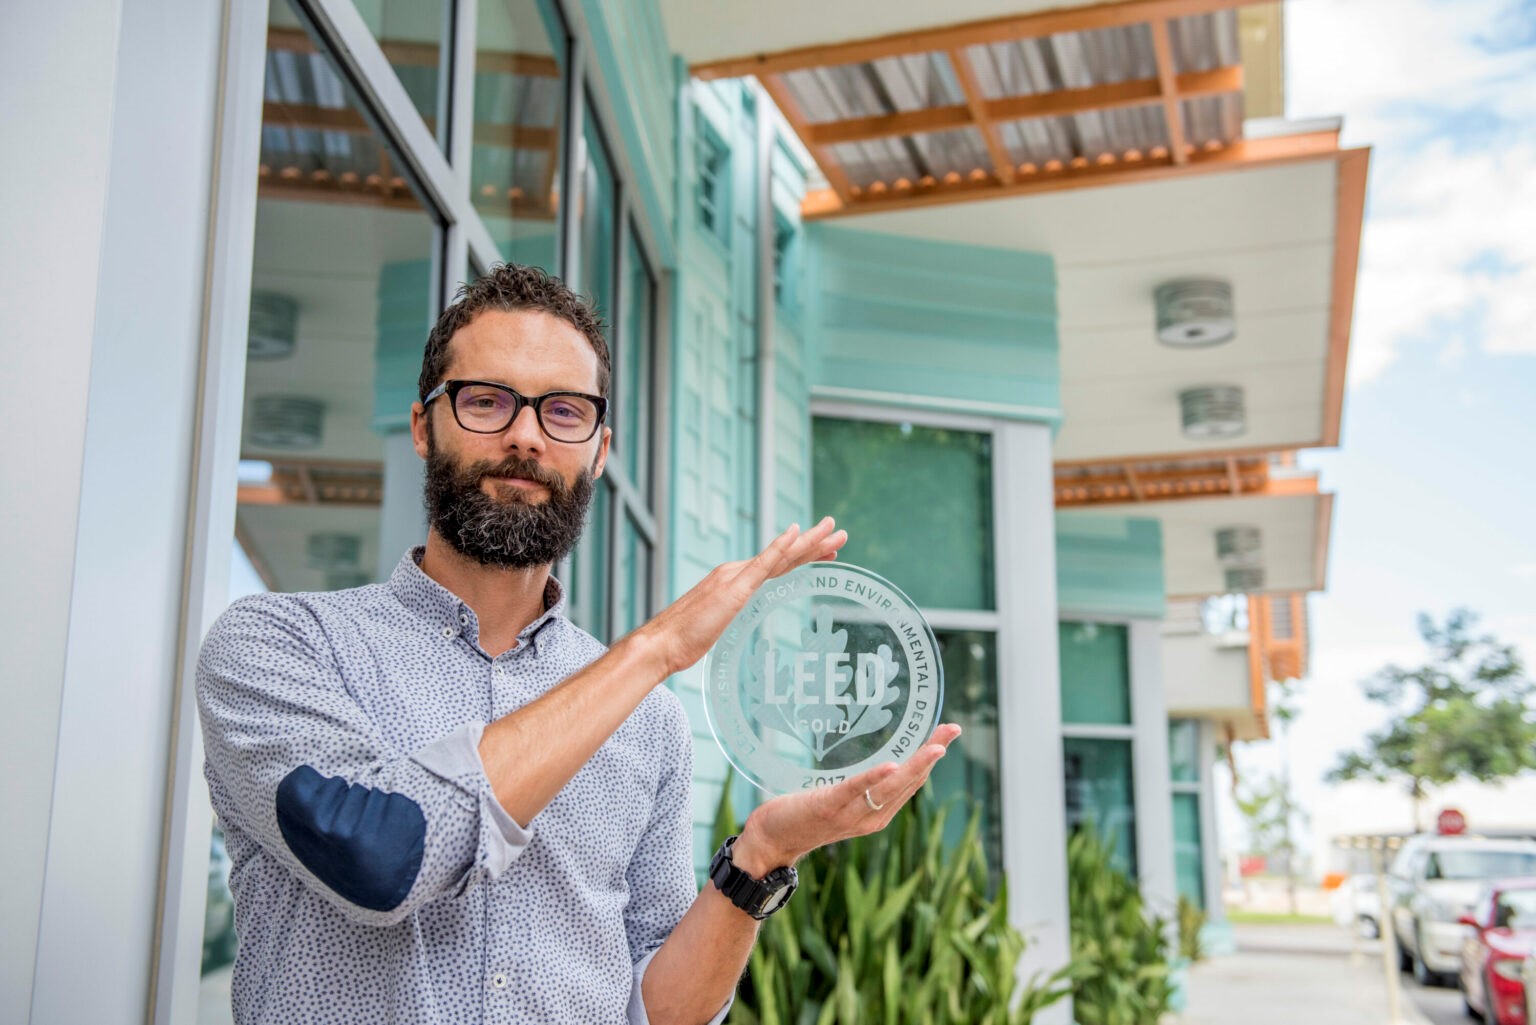 All about LEED: A Q&A with Decco’s Design Manager Ross Tibbetts